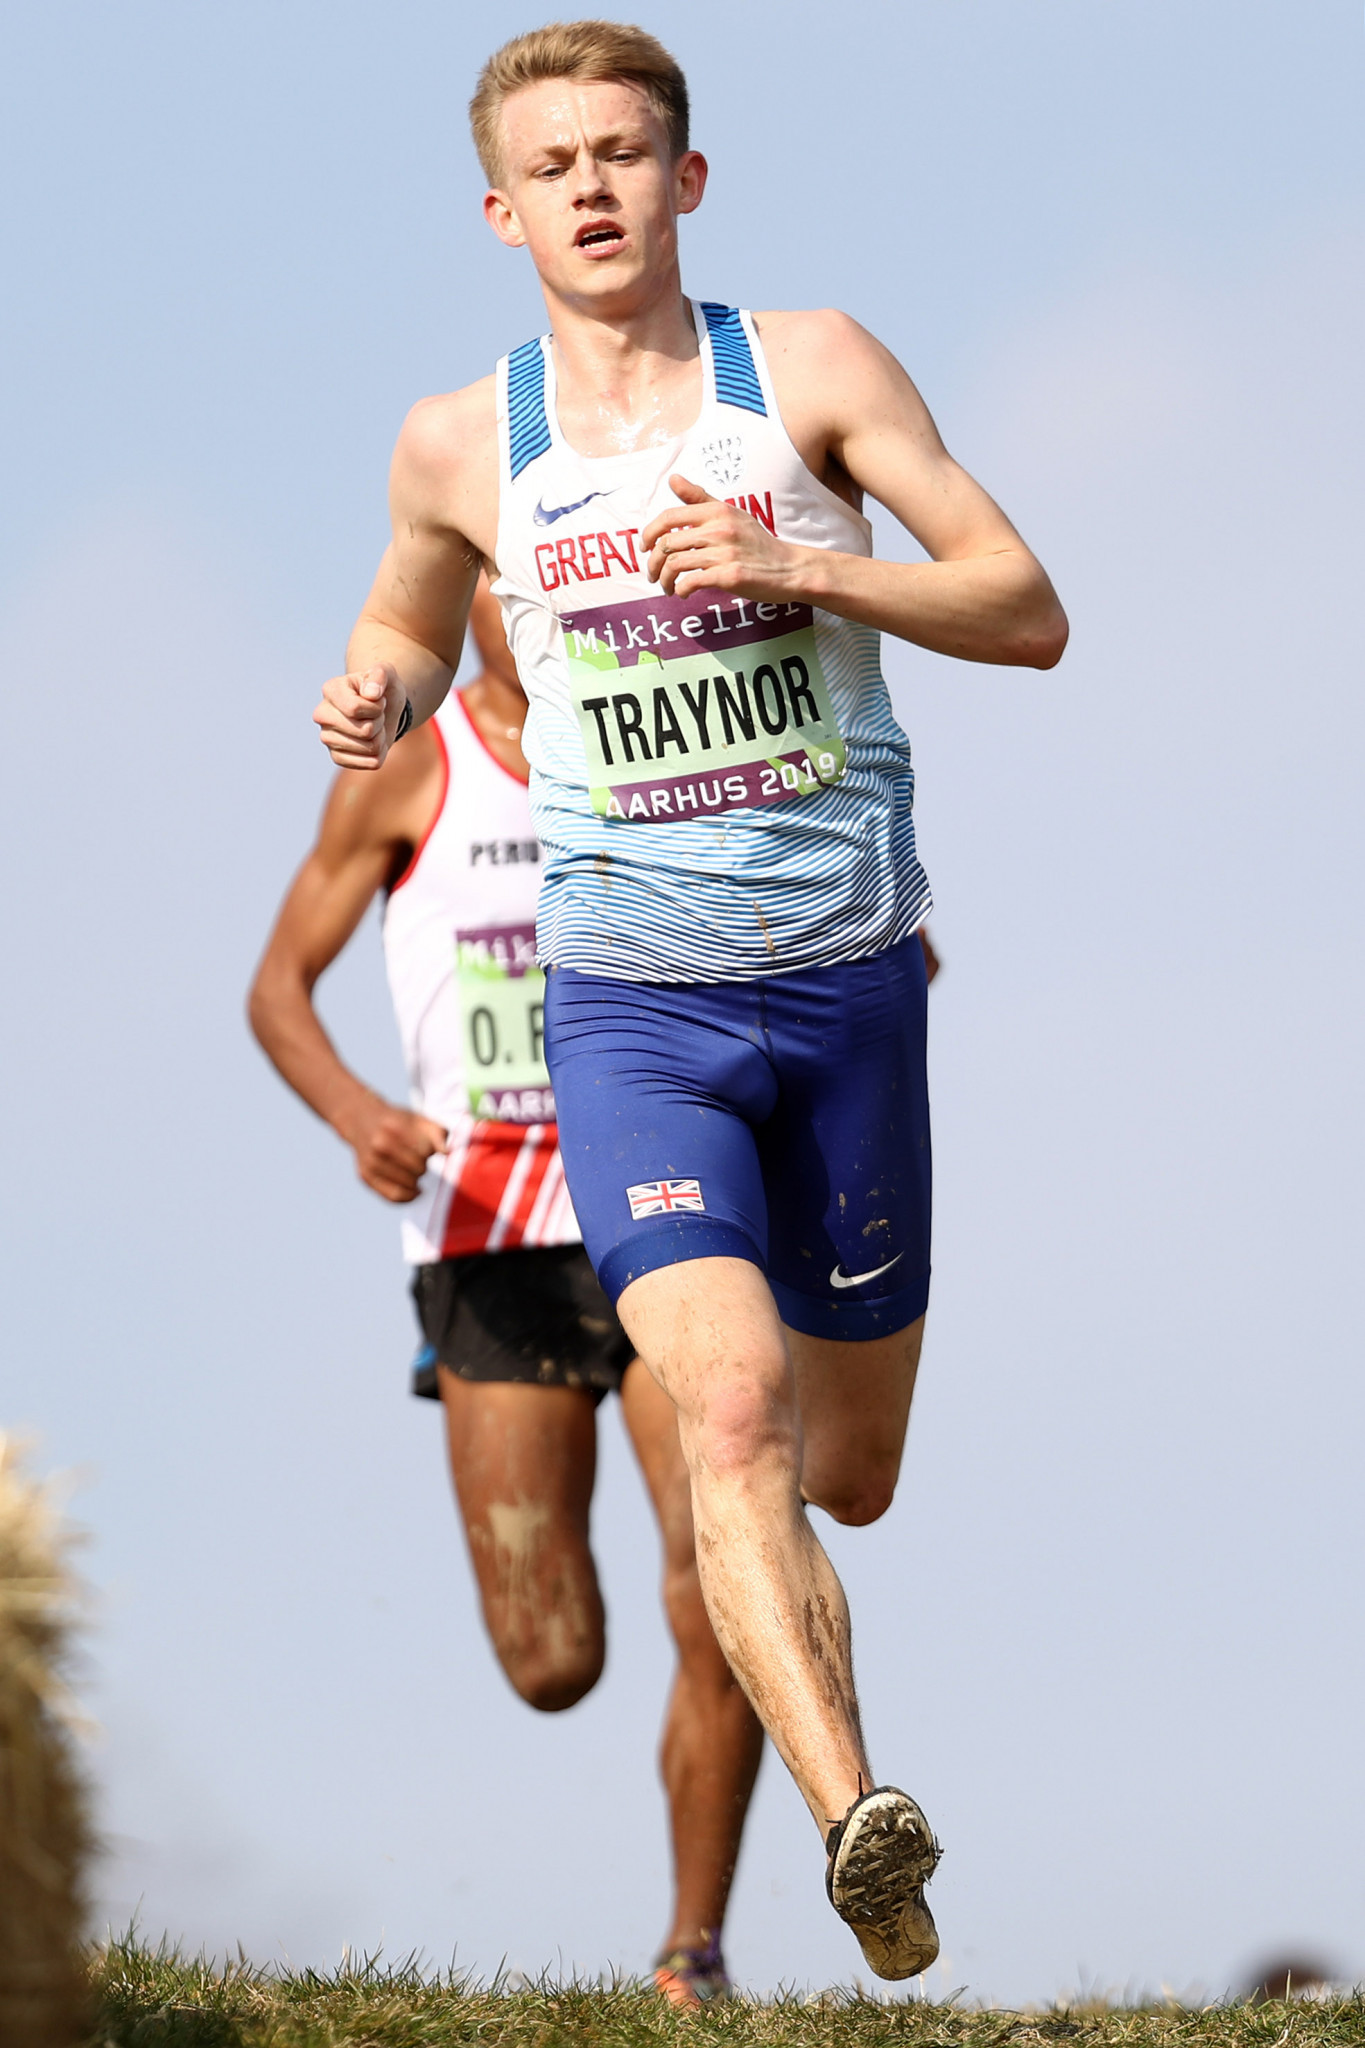 Luke Traynor, pictured competing for Britain at this year's IAAF World Cross Country Championships in Aarhus, faces a ban after testing positive for cocaine ©Getty Images